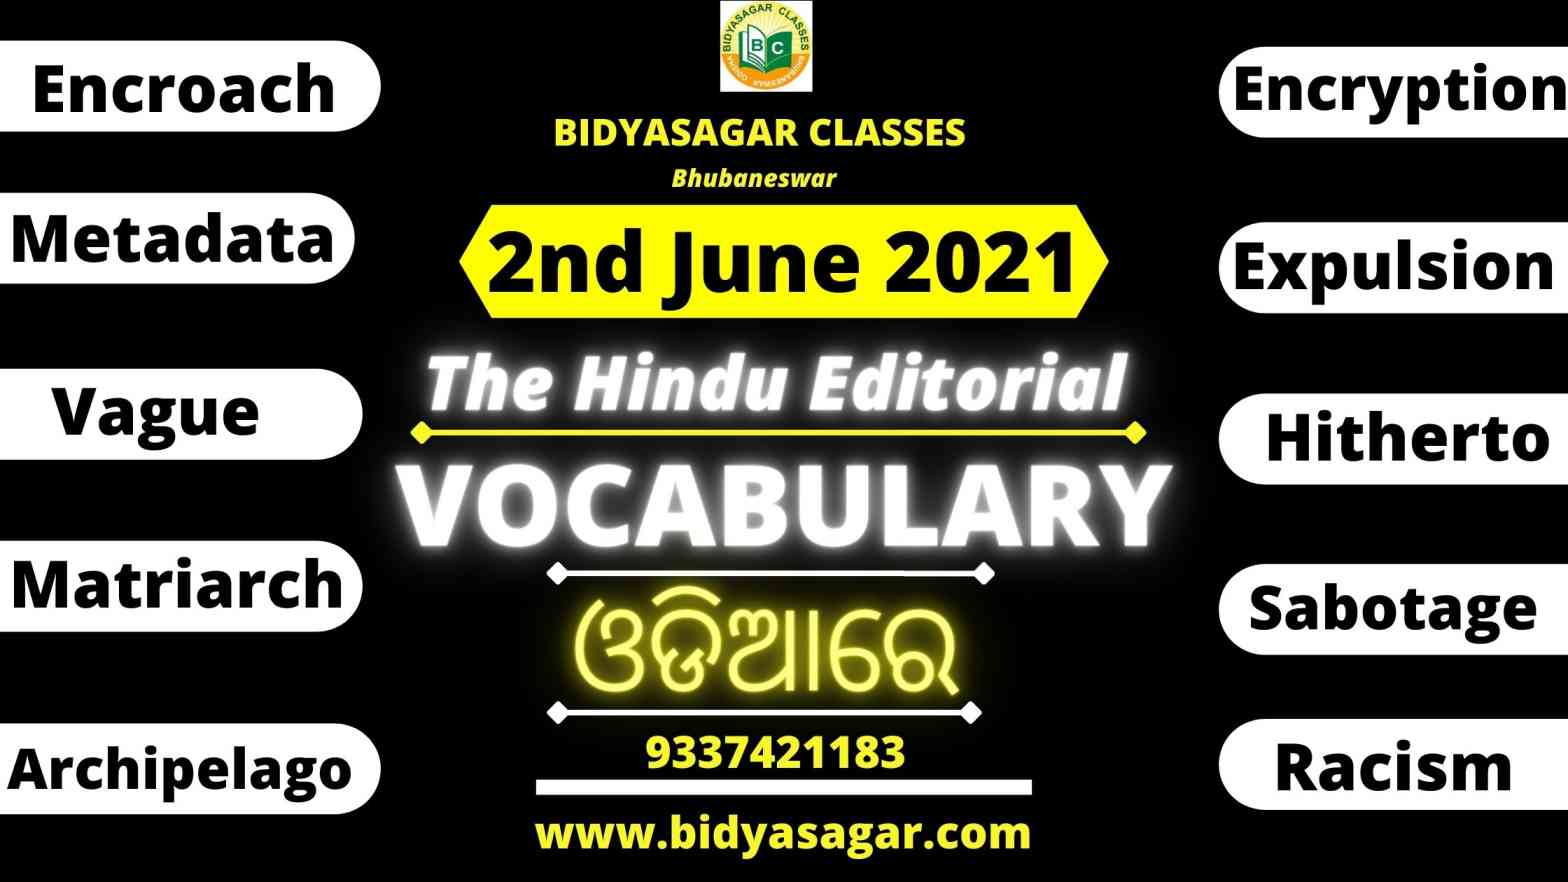 The Hindu Editorial Vocabulary of 2nd June 2021